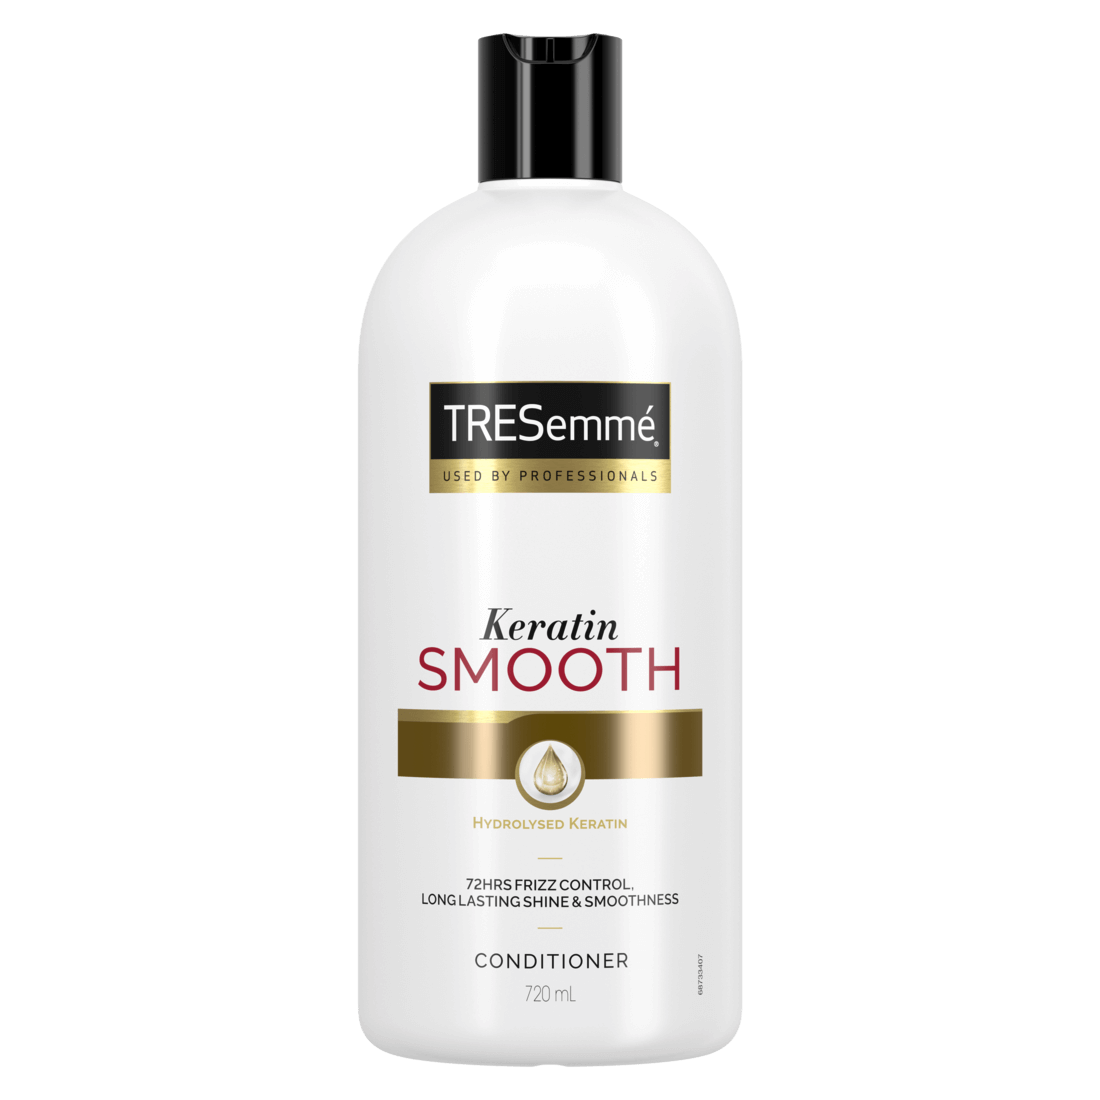 Keratin Smooth Conditioner 720 ml front of pack